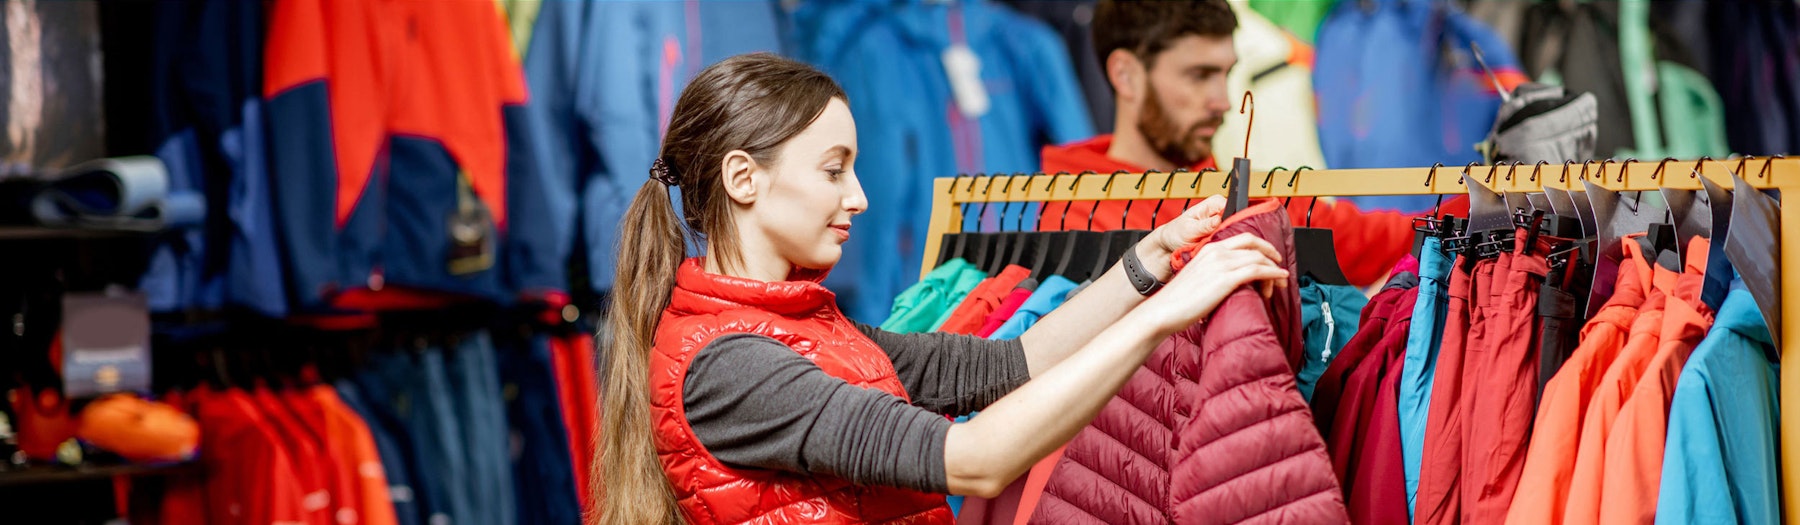 A woman shopping in retail for Patagonia jacket in retail display.